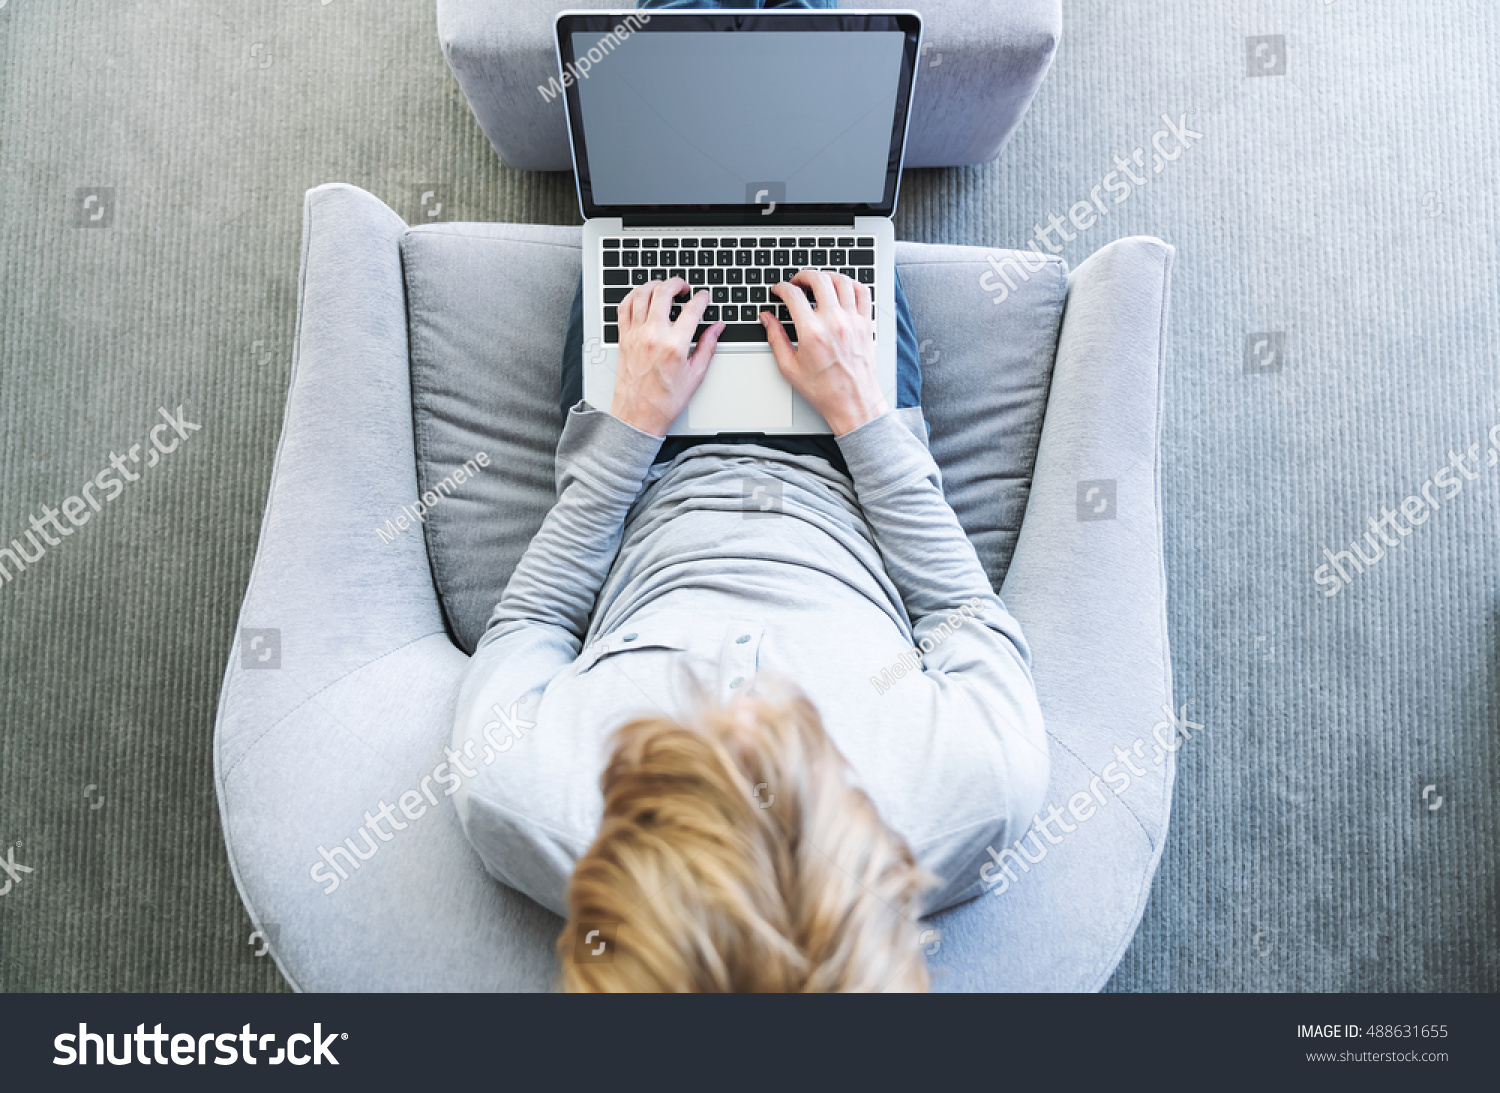 Top down view of young blond person typing on laptop computer #488631655